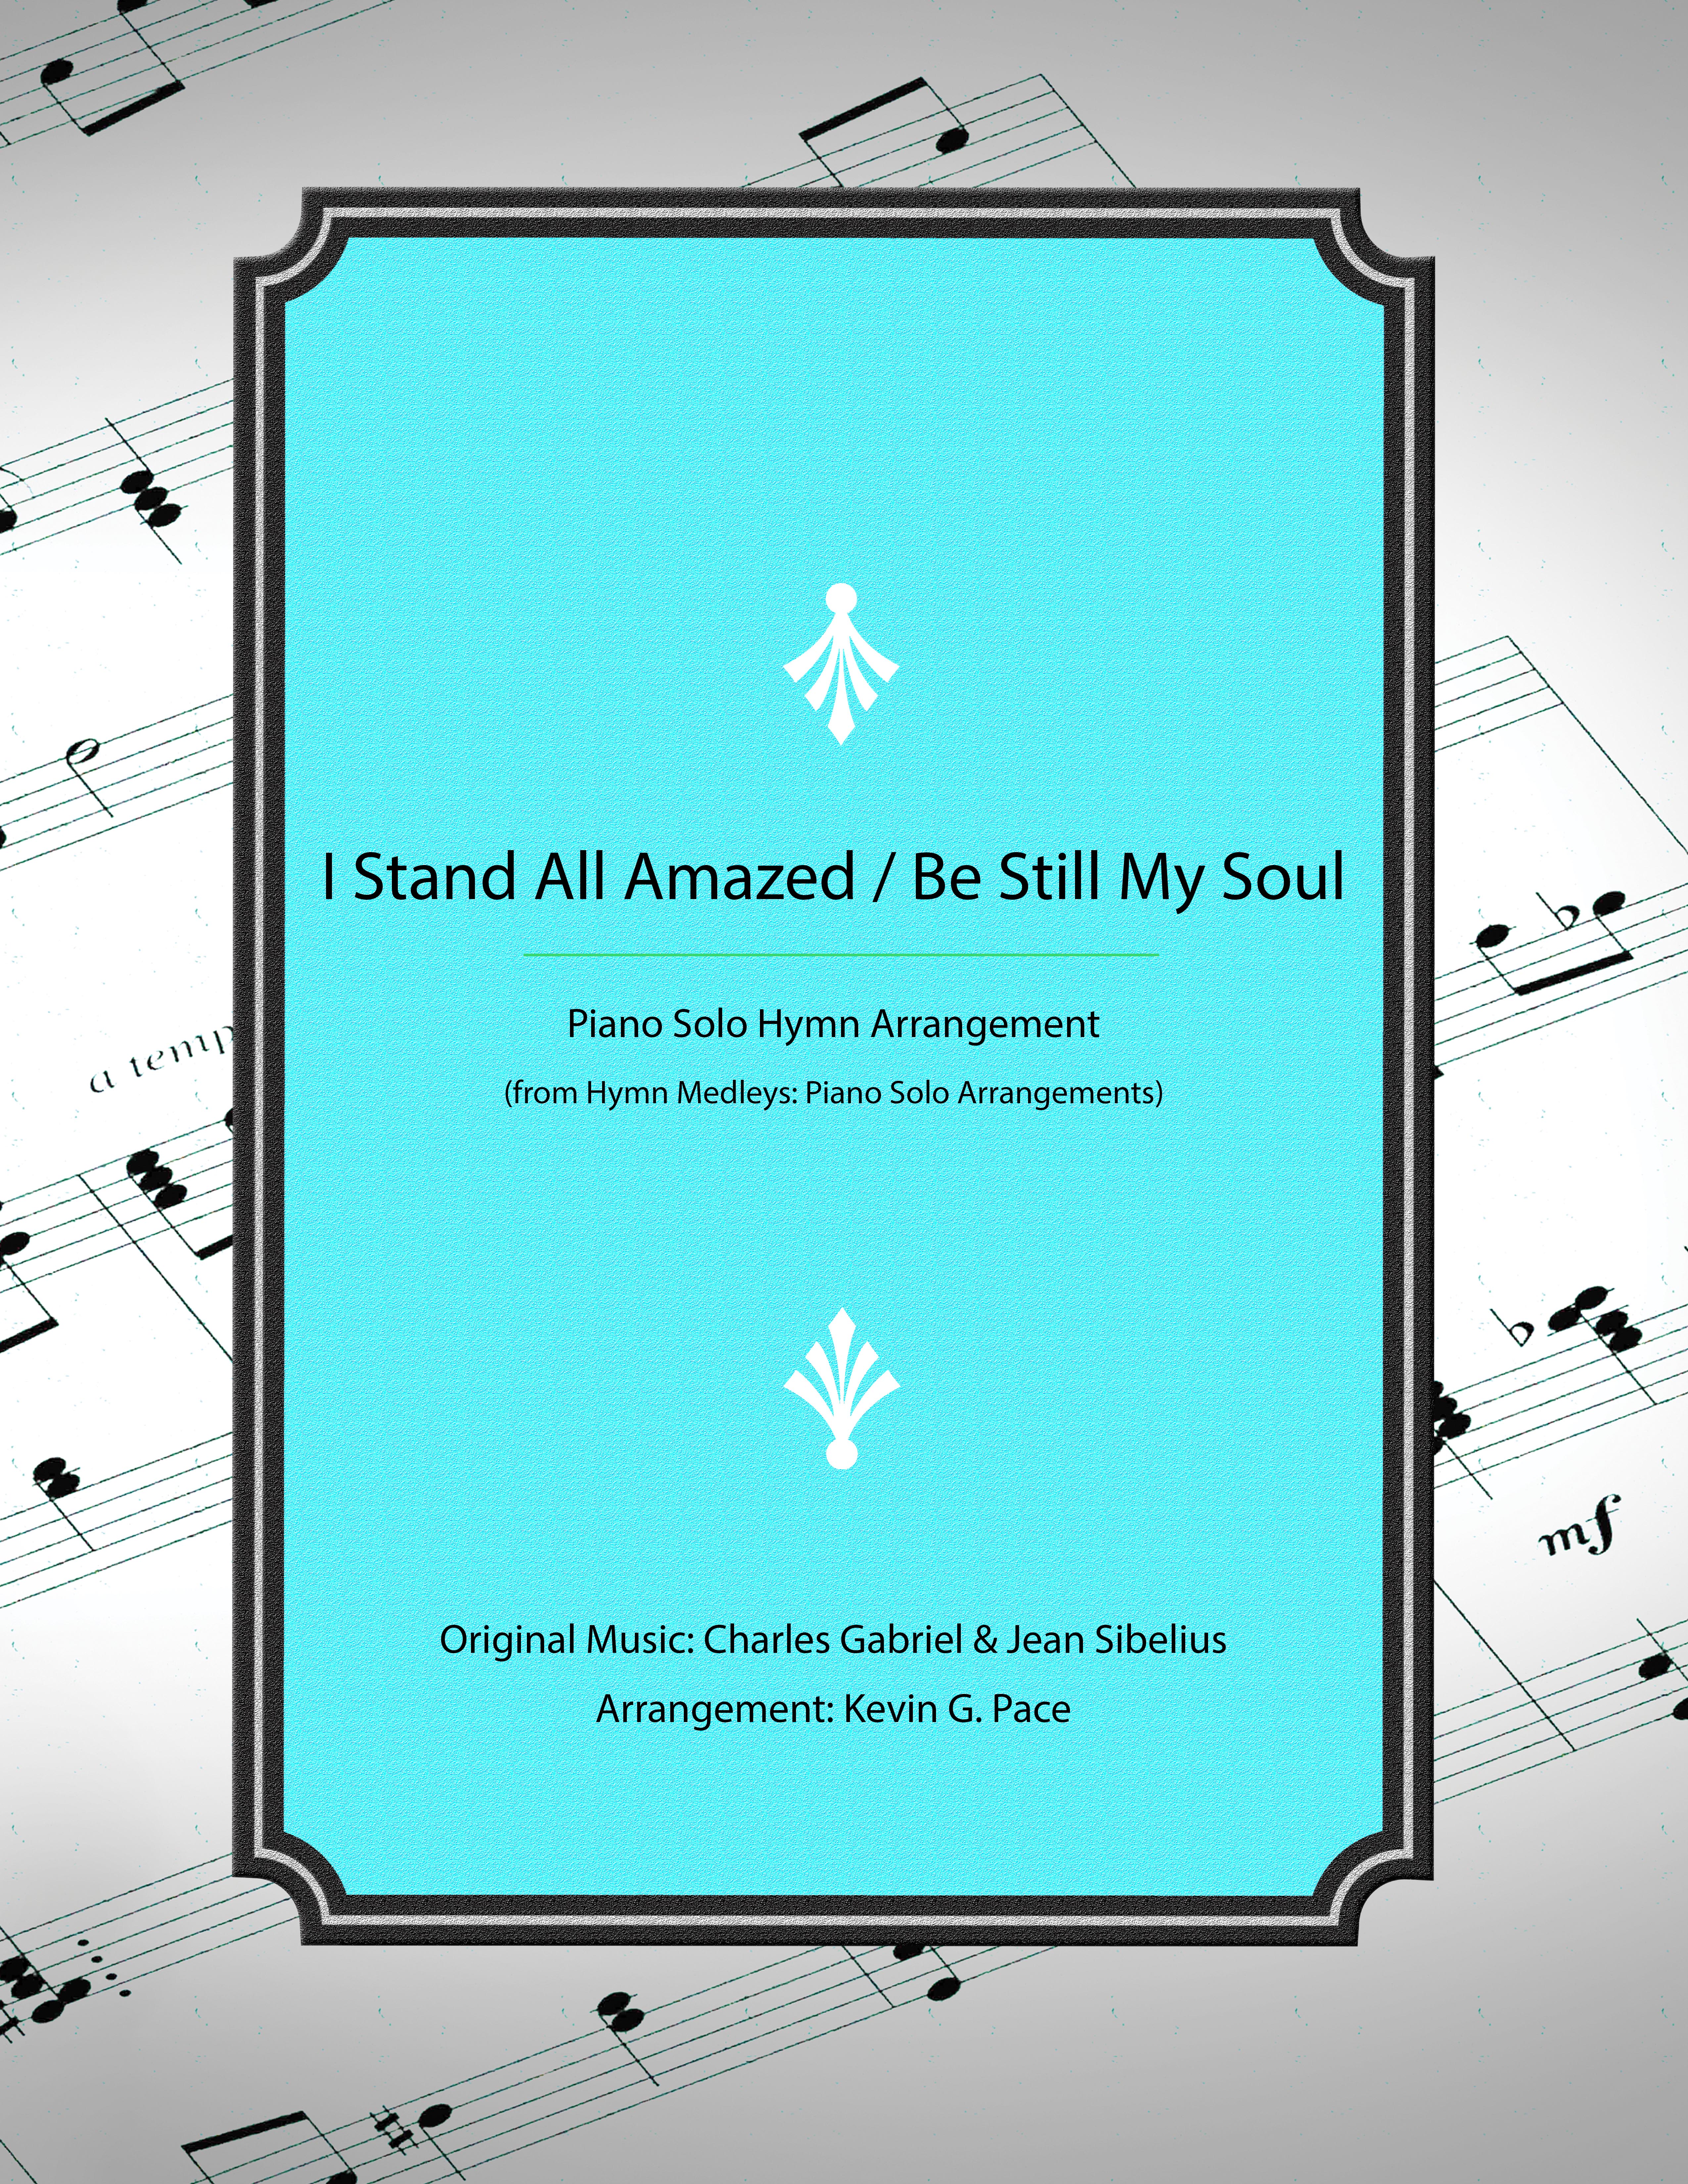 I_stand_all_amazed_-_be_still_my_soul_-_piano_medley